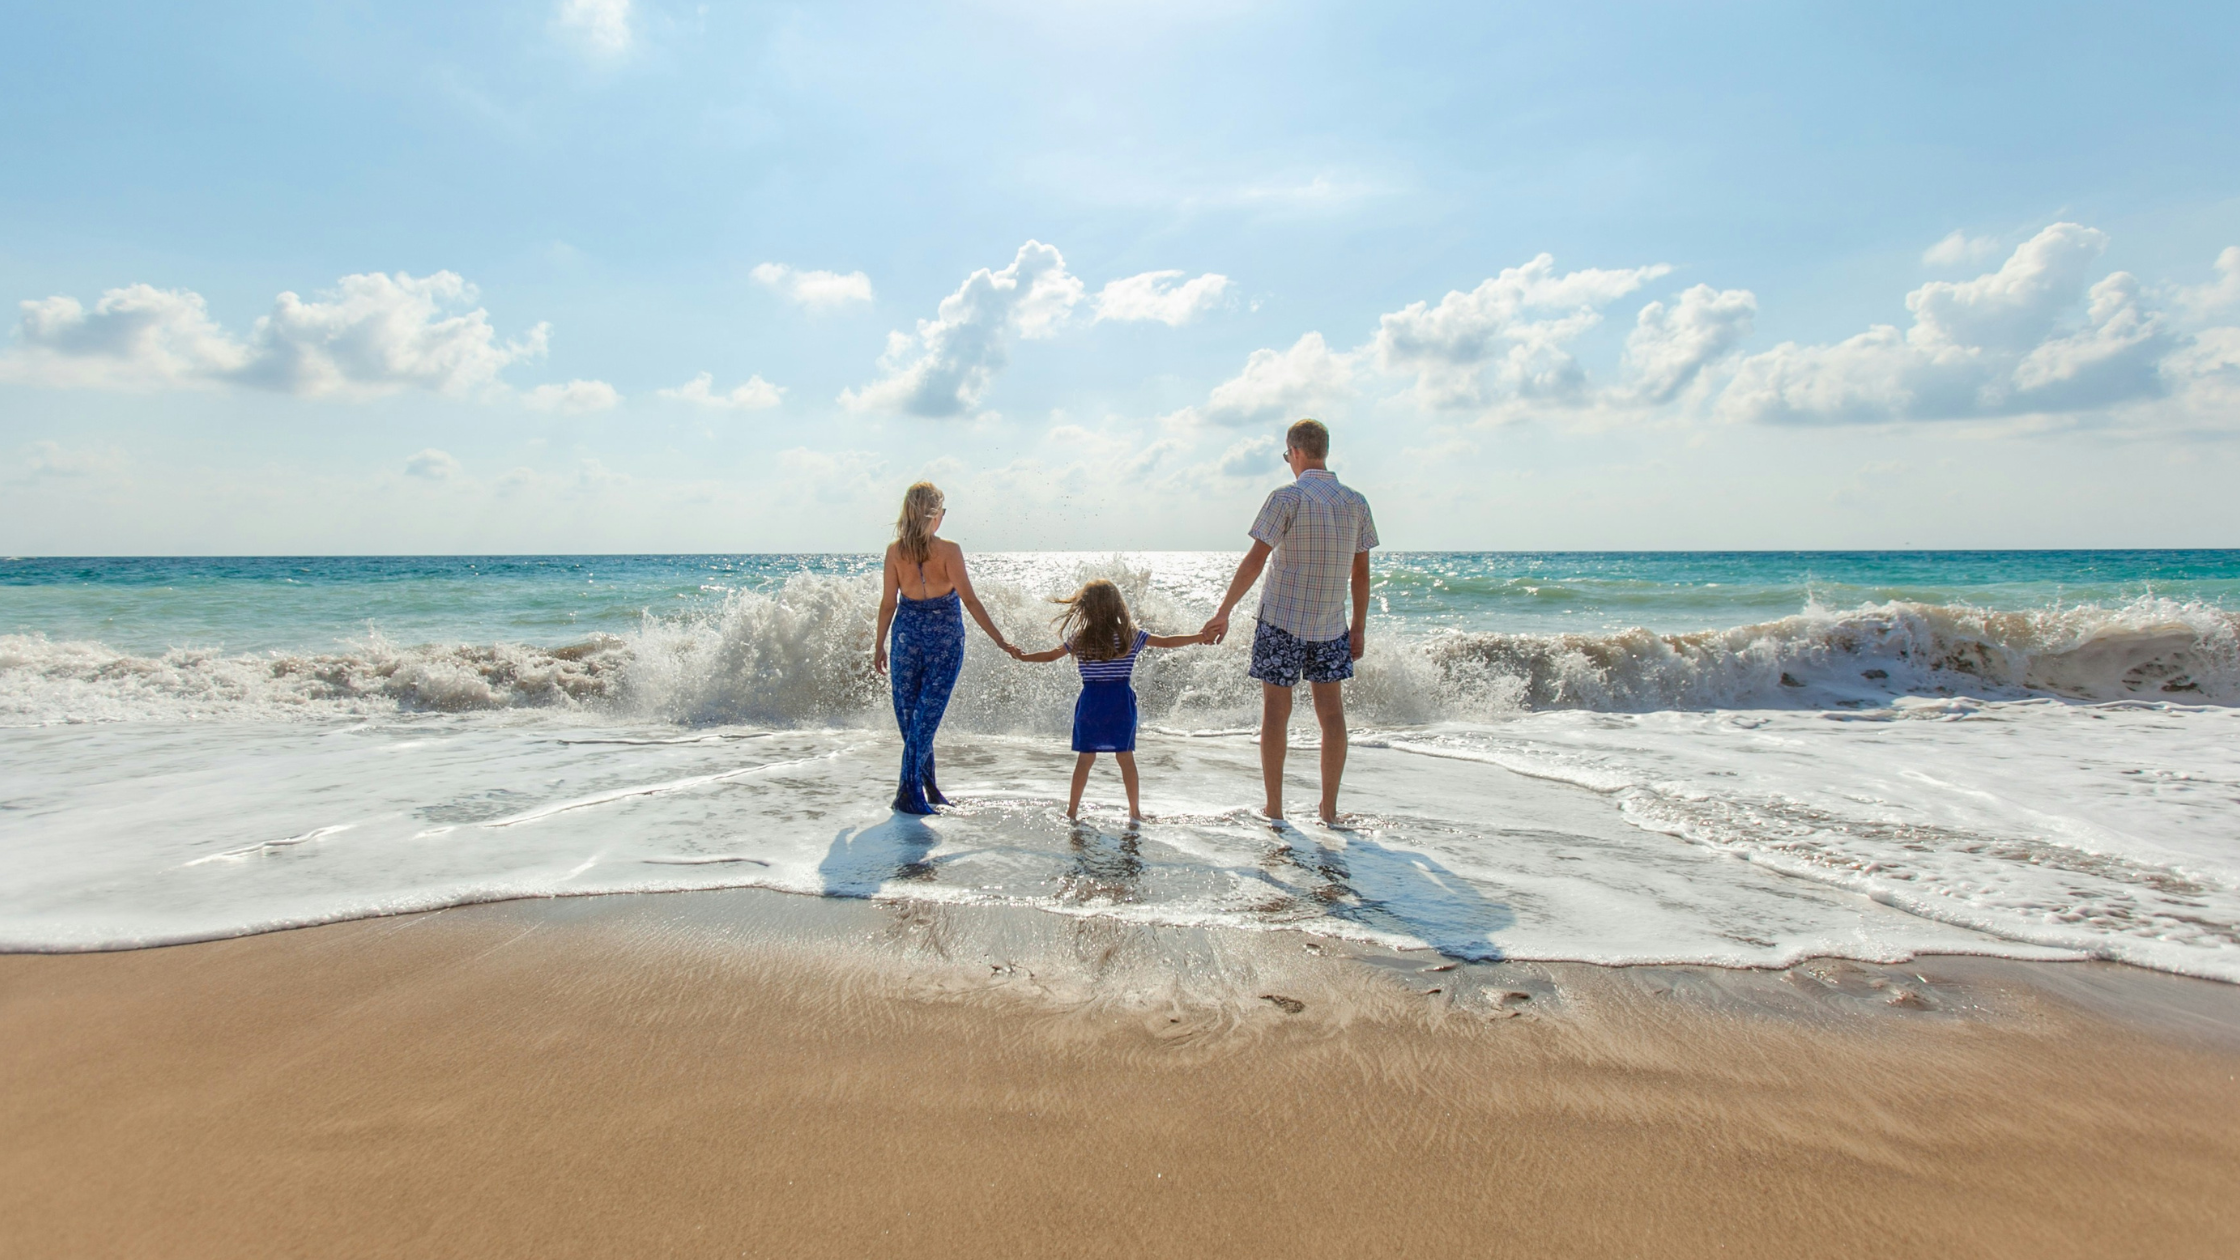 Travel Across Generations: How Hotels, Resorts, and DMOs Can Attract the Entire Family